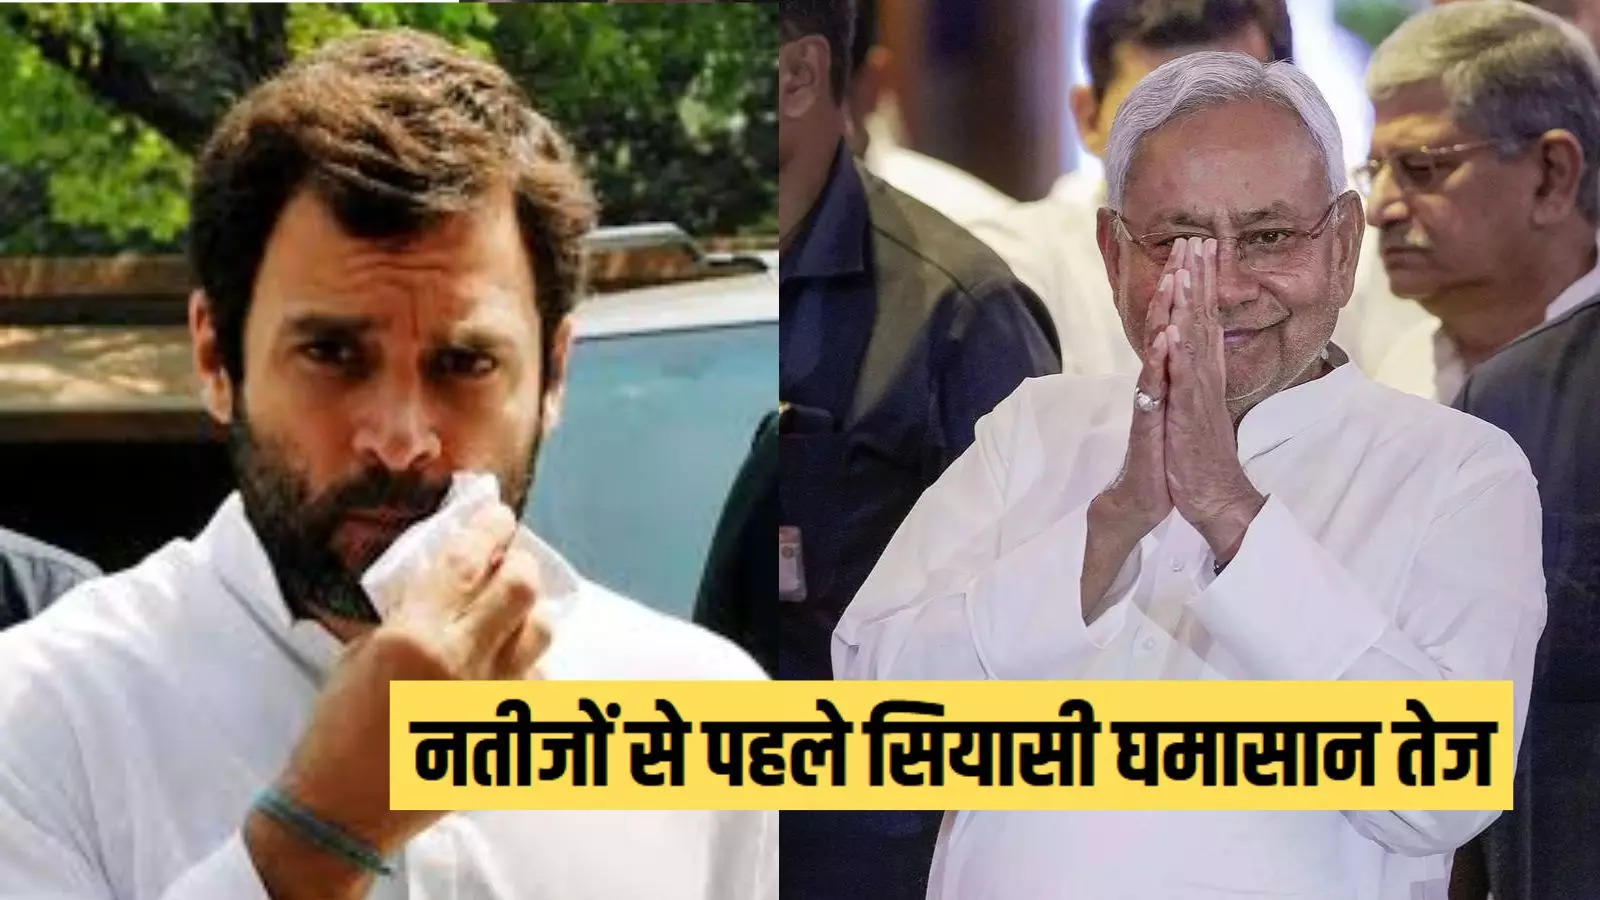 Nitish Kumar is coming to Delhi and Rahul Gandhi reached Congress headquarters, political stir increased before the results